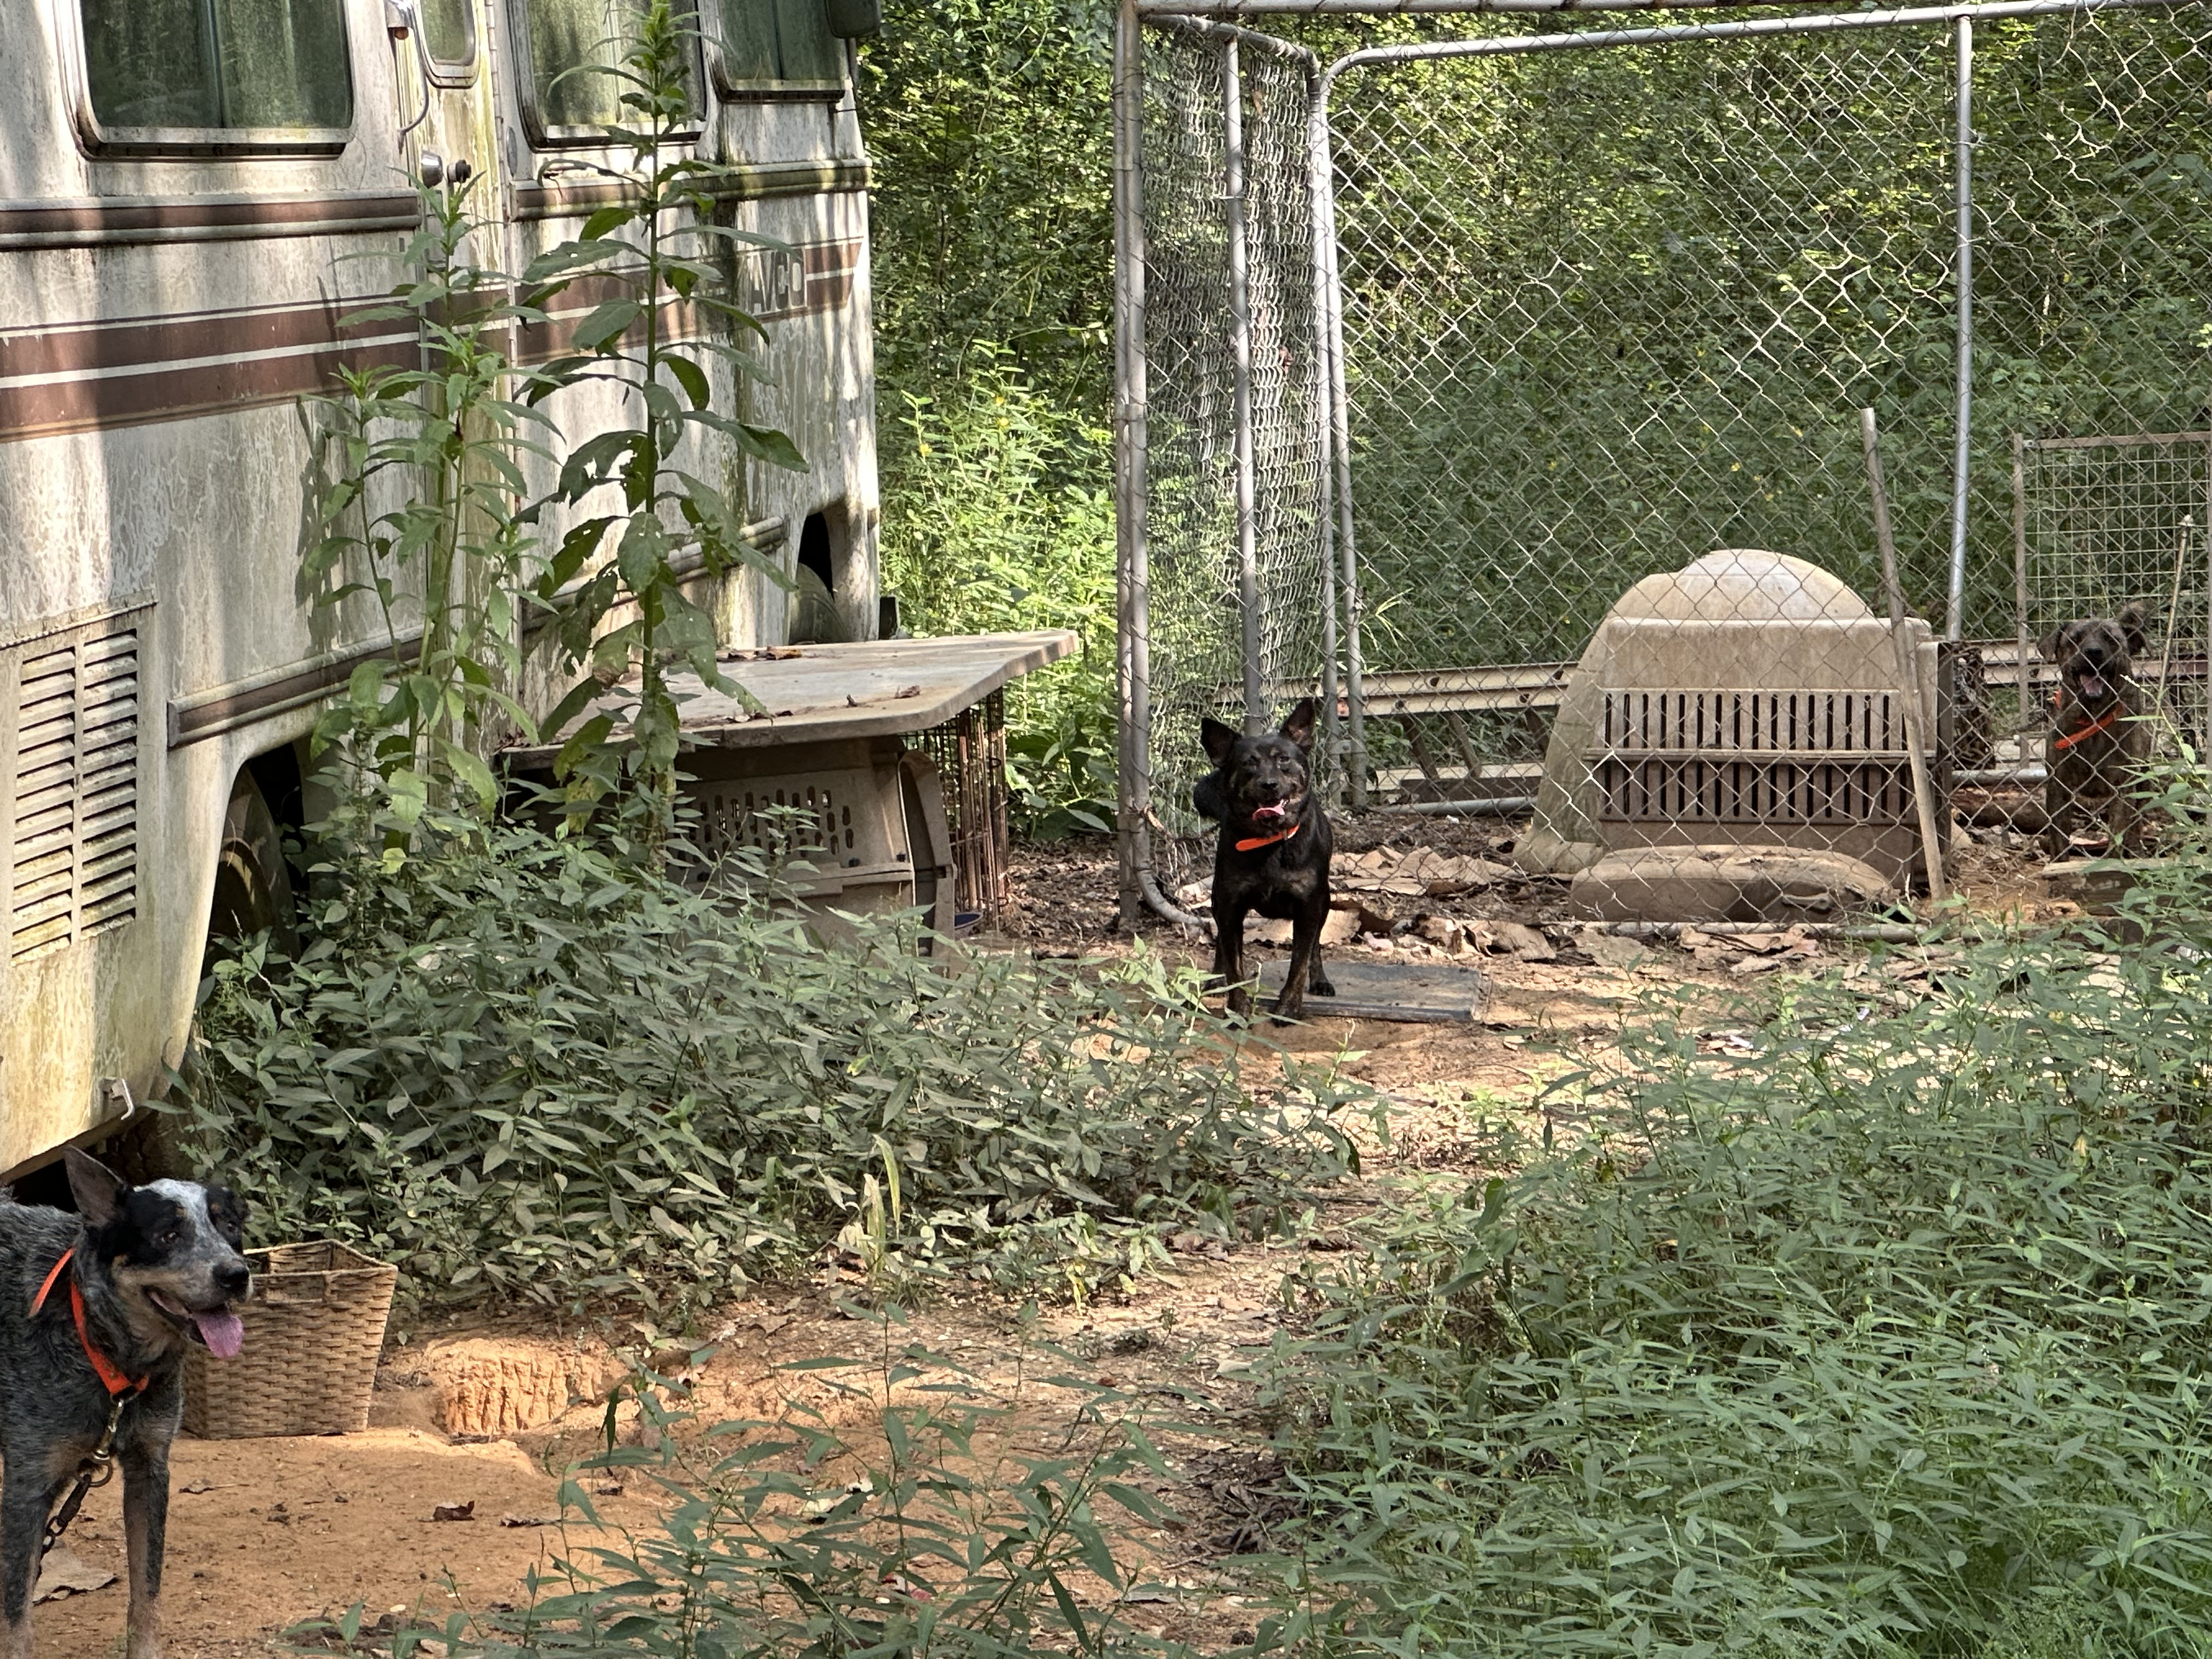 Multiple dogs are tied in an overgrown yard by a chain link fence.